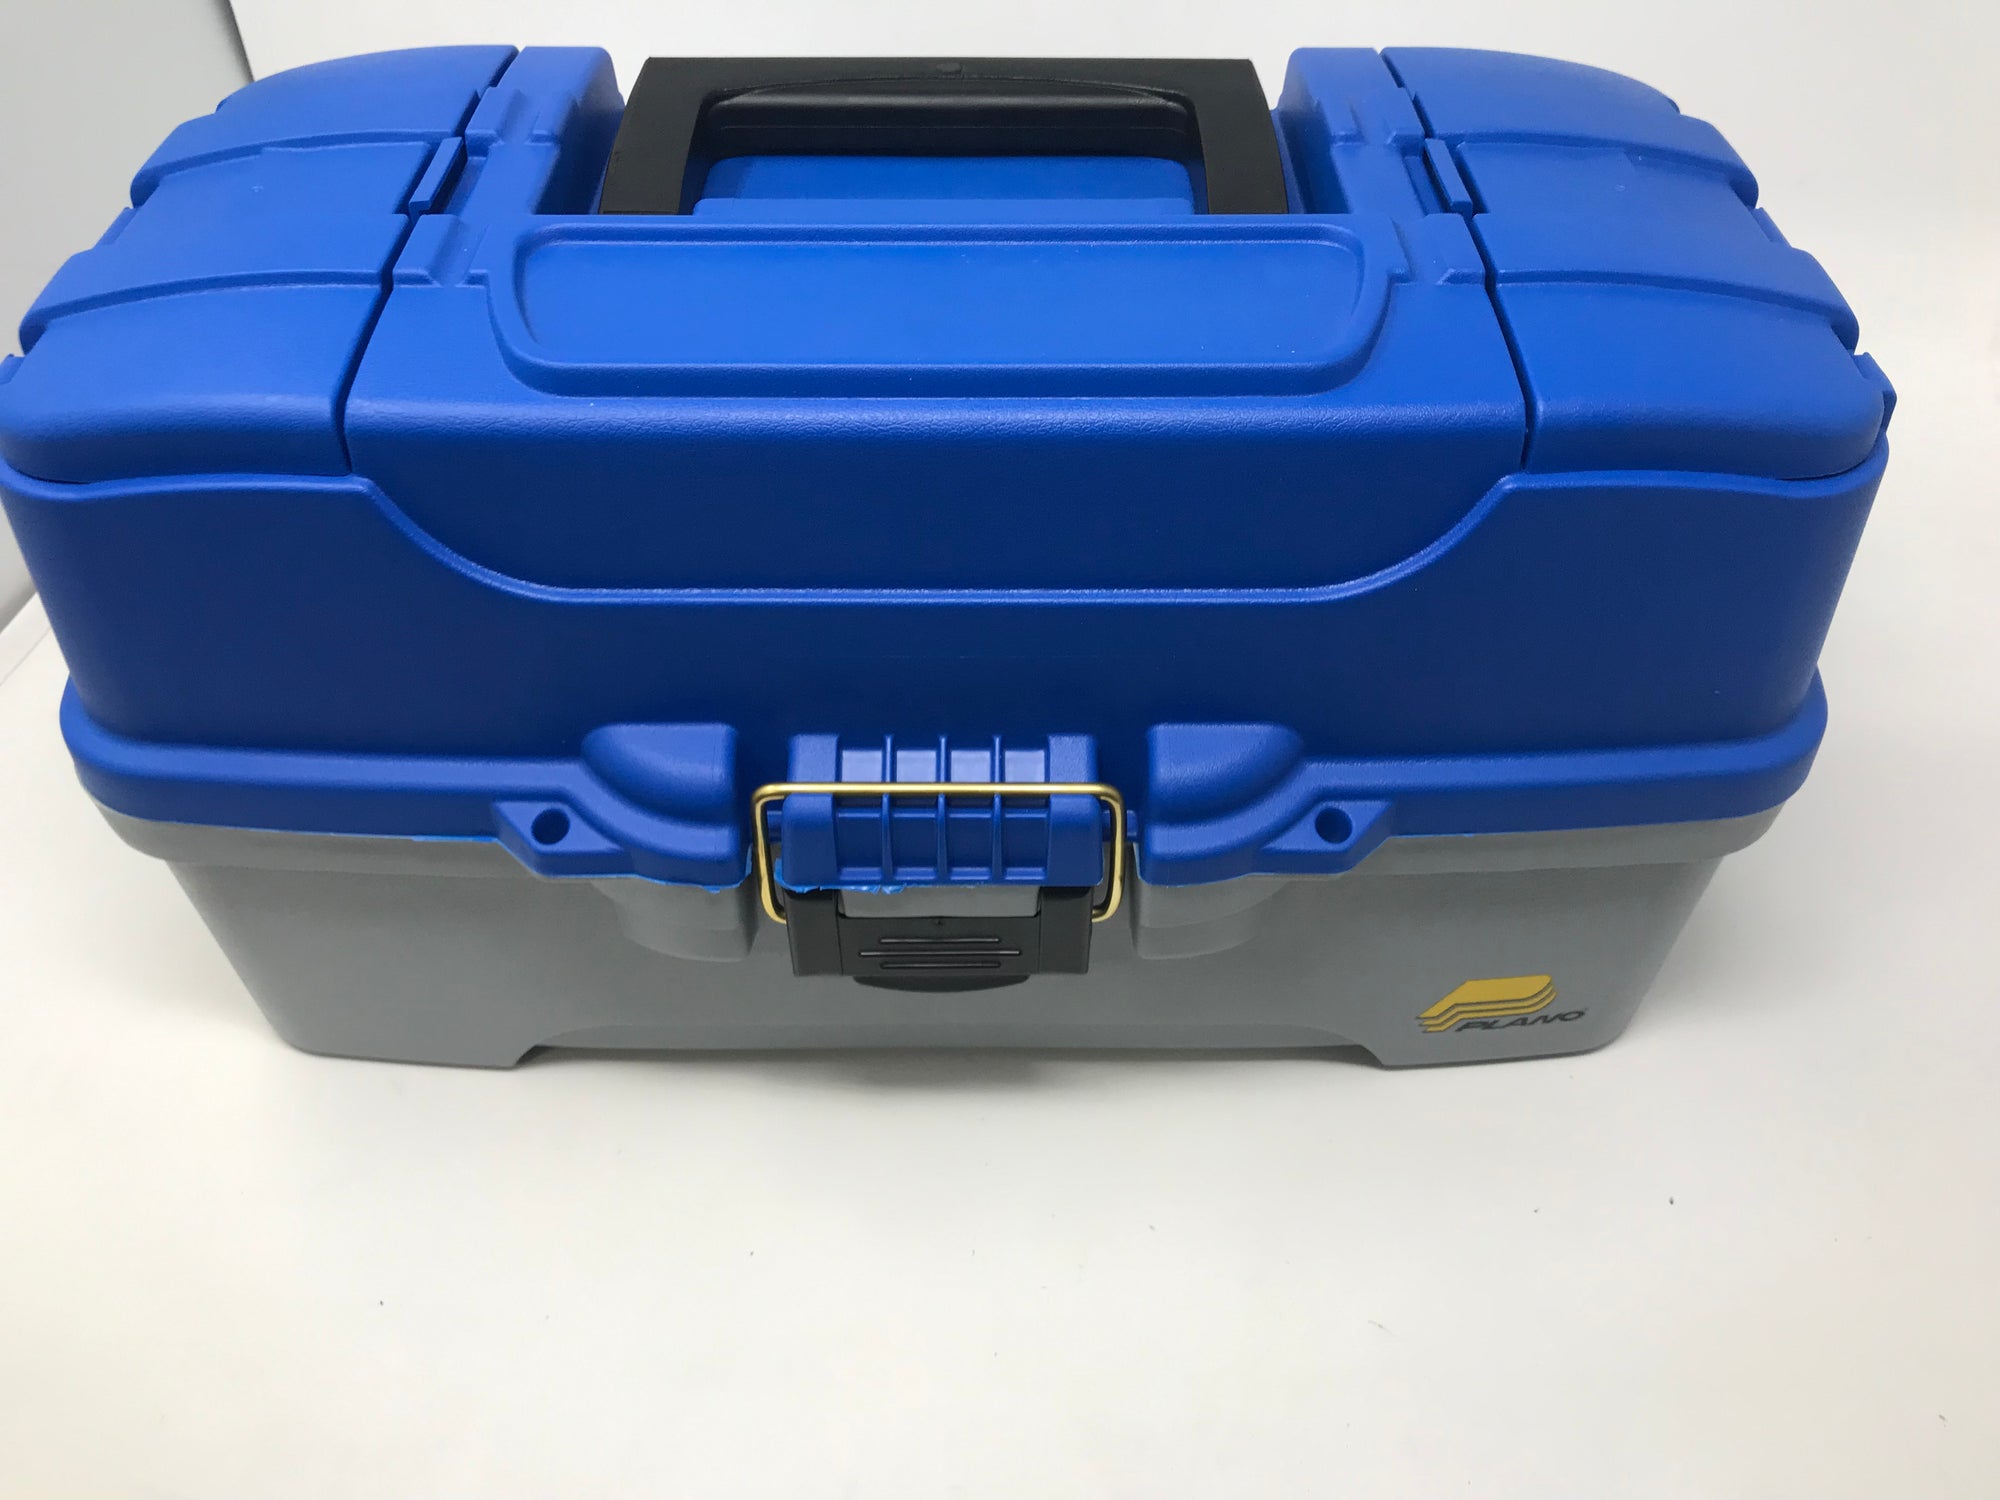 New Other Plano Large 3 Tray Tackle Box Blue/Gray Three tray Large